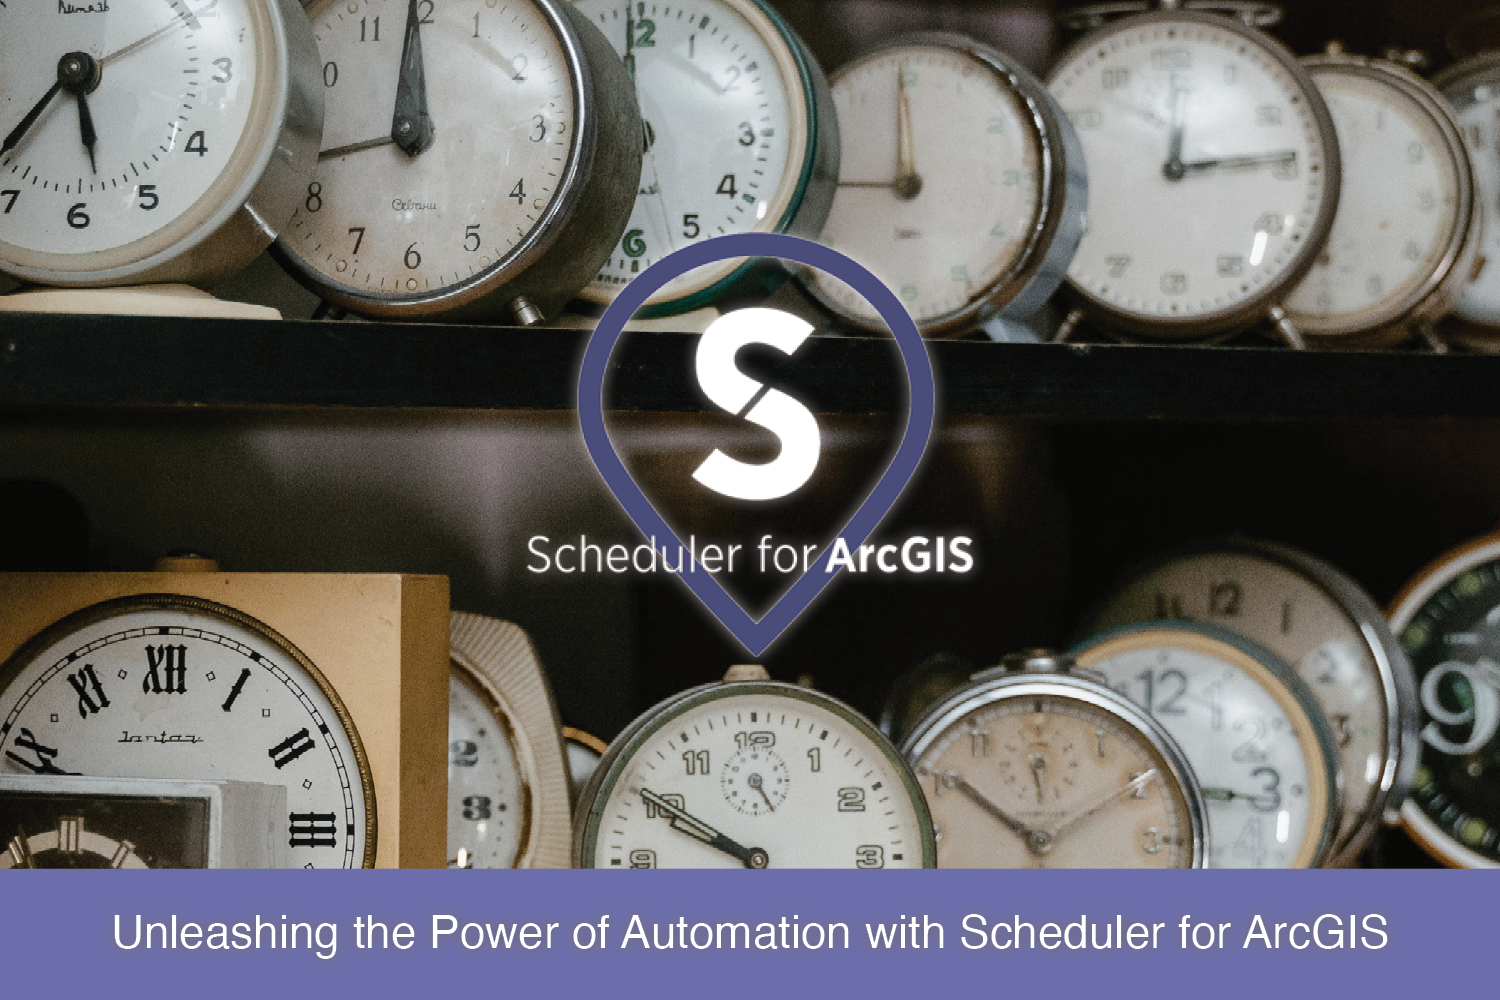 Product Spotlight: Scheduler for ArcGIS